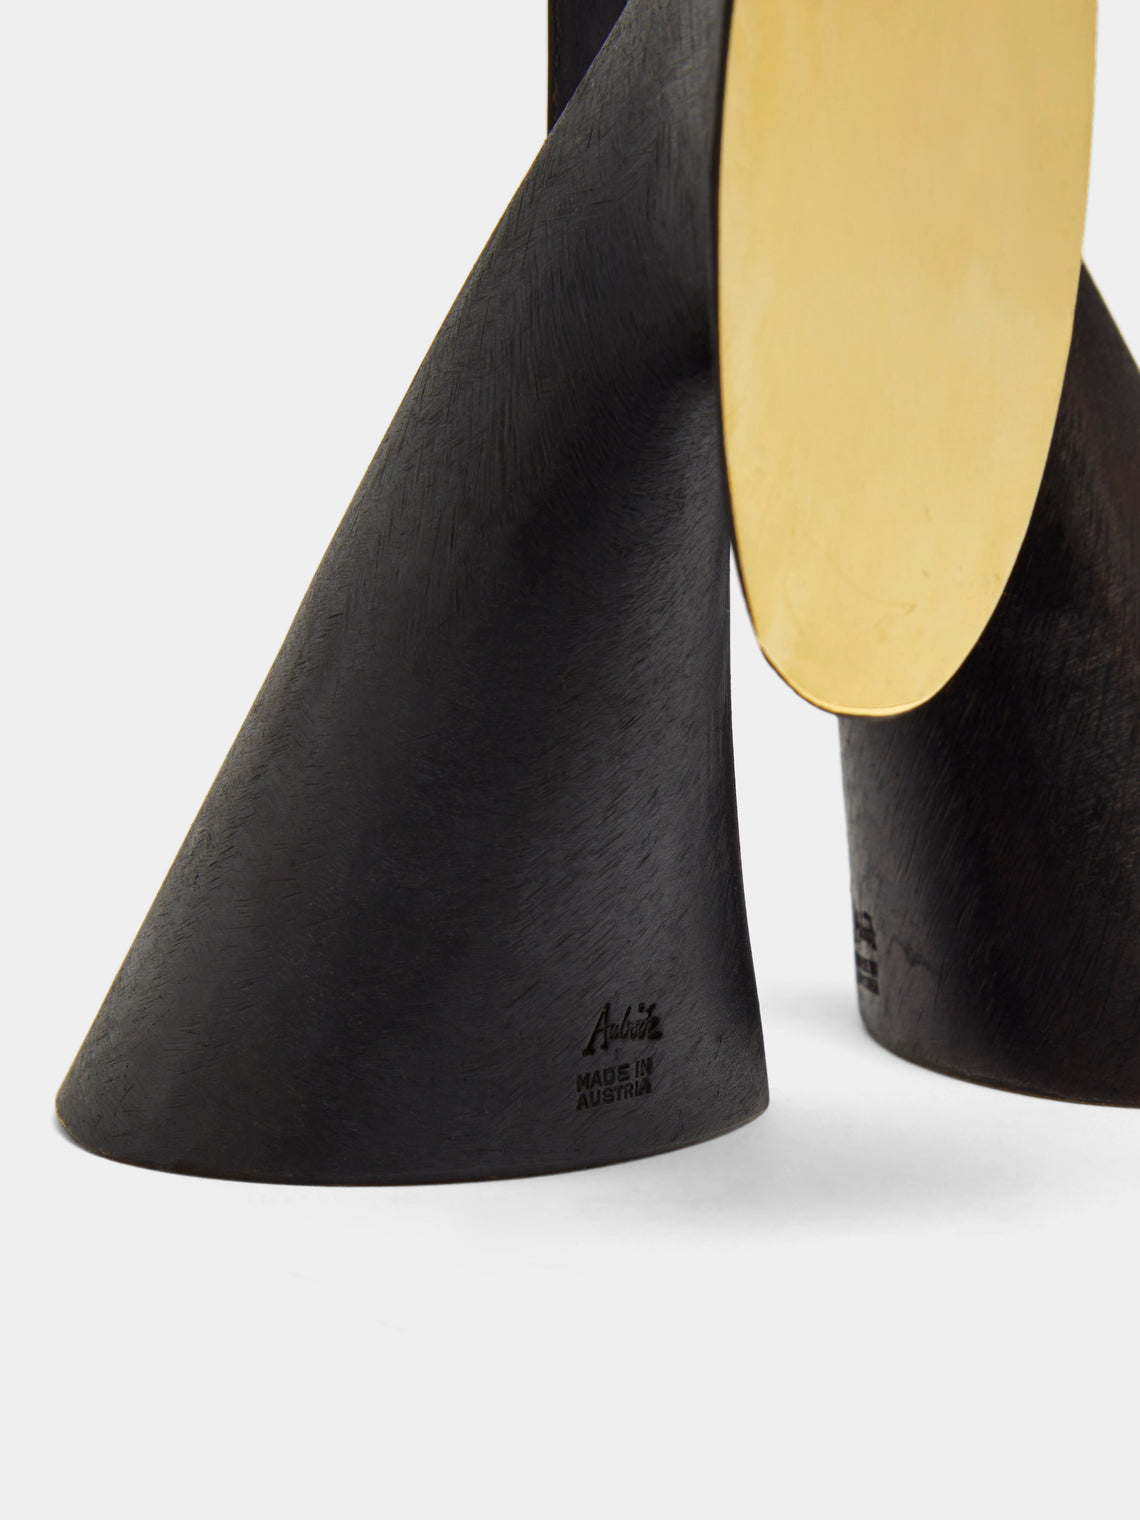 Carl Auböck - Brass Painted Bookends - Black - ABASK